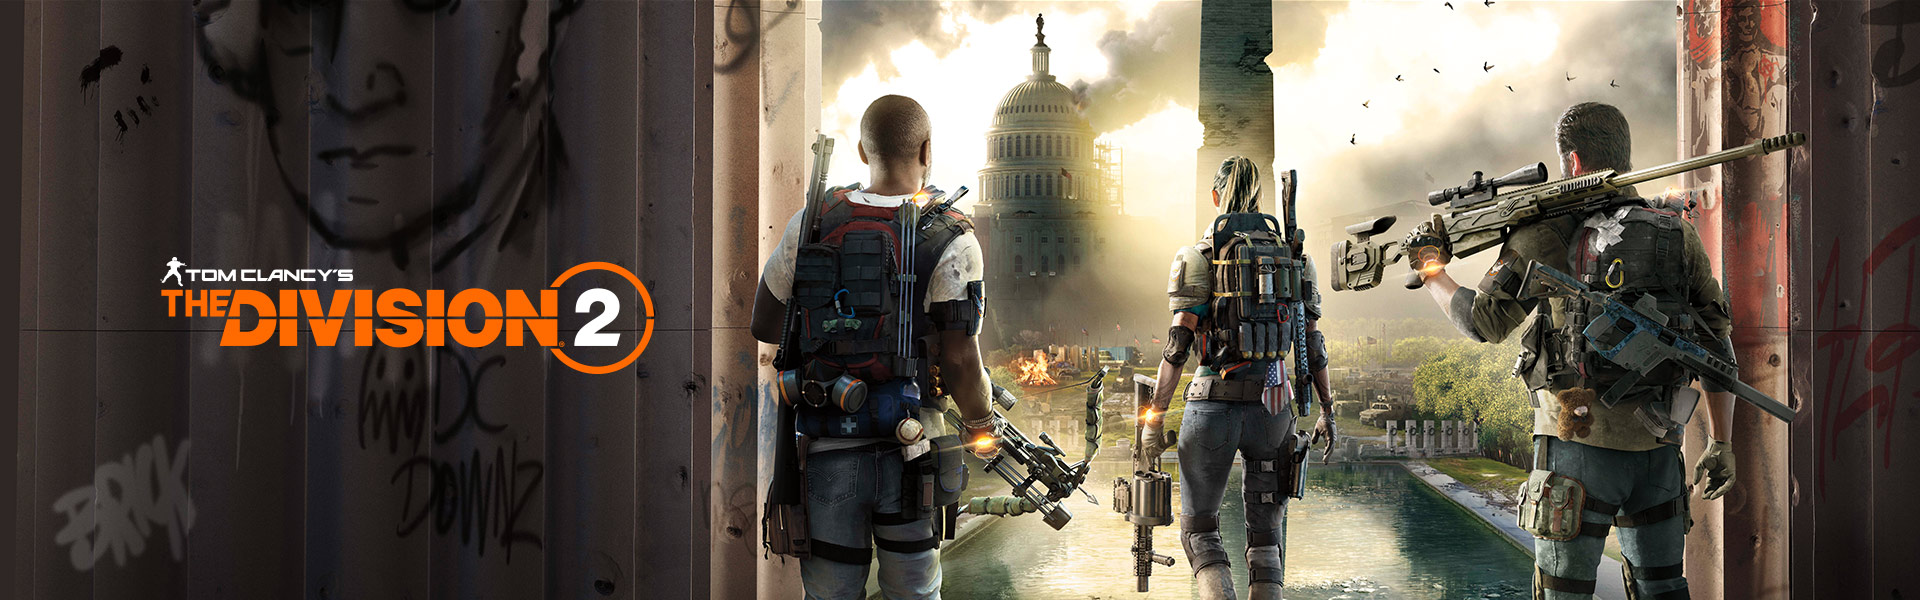 Gaming: Are You Ready for Ubisoft’s The Division 2?